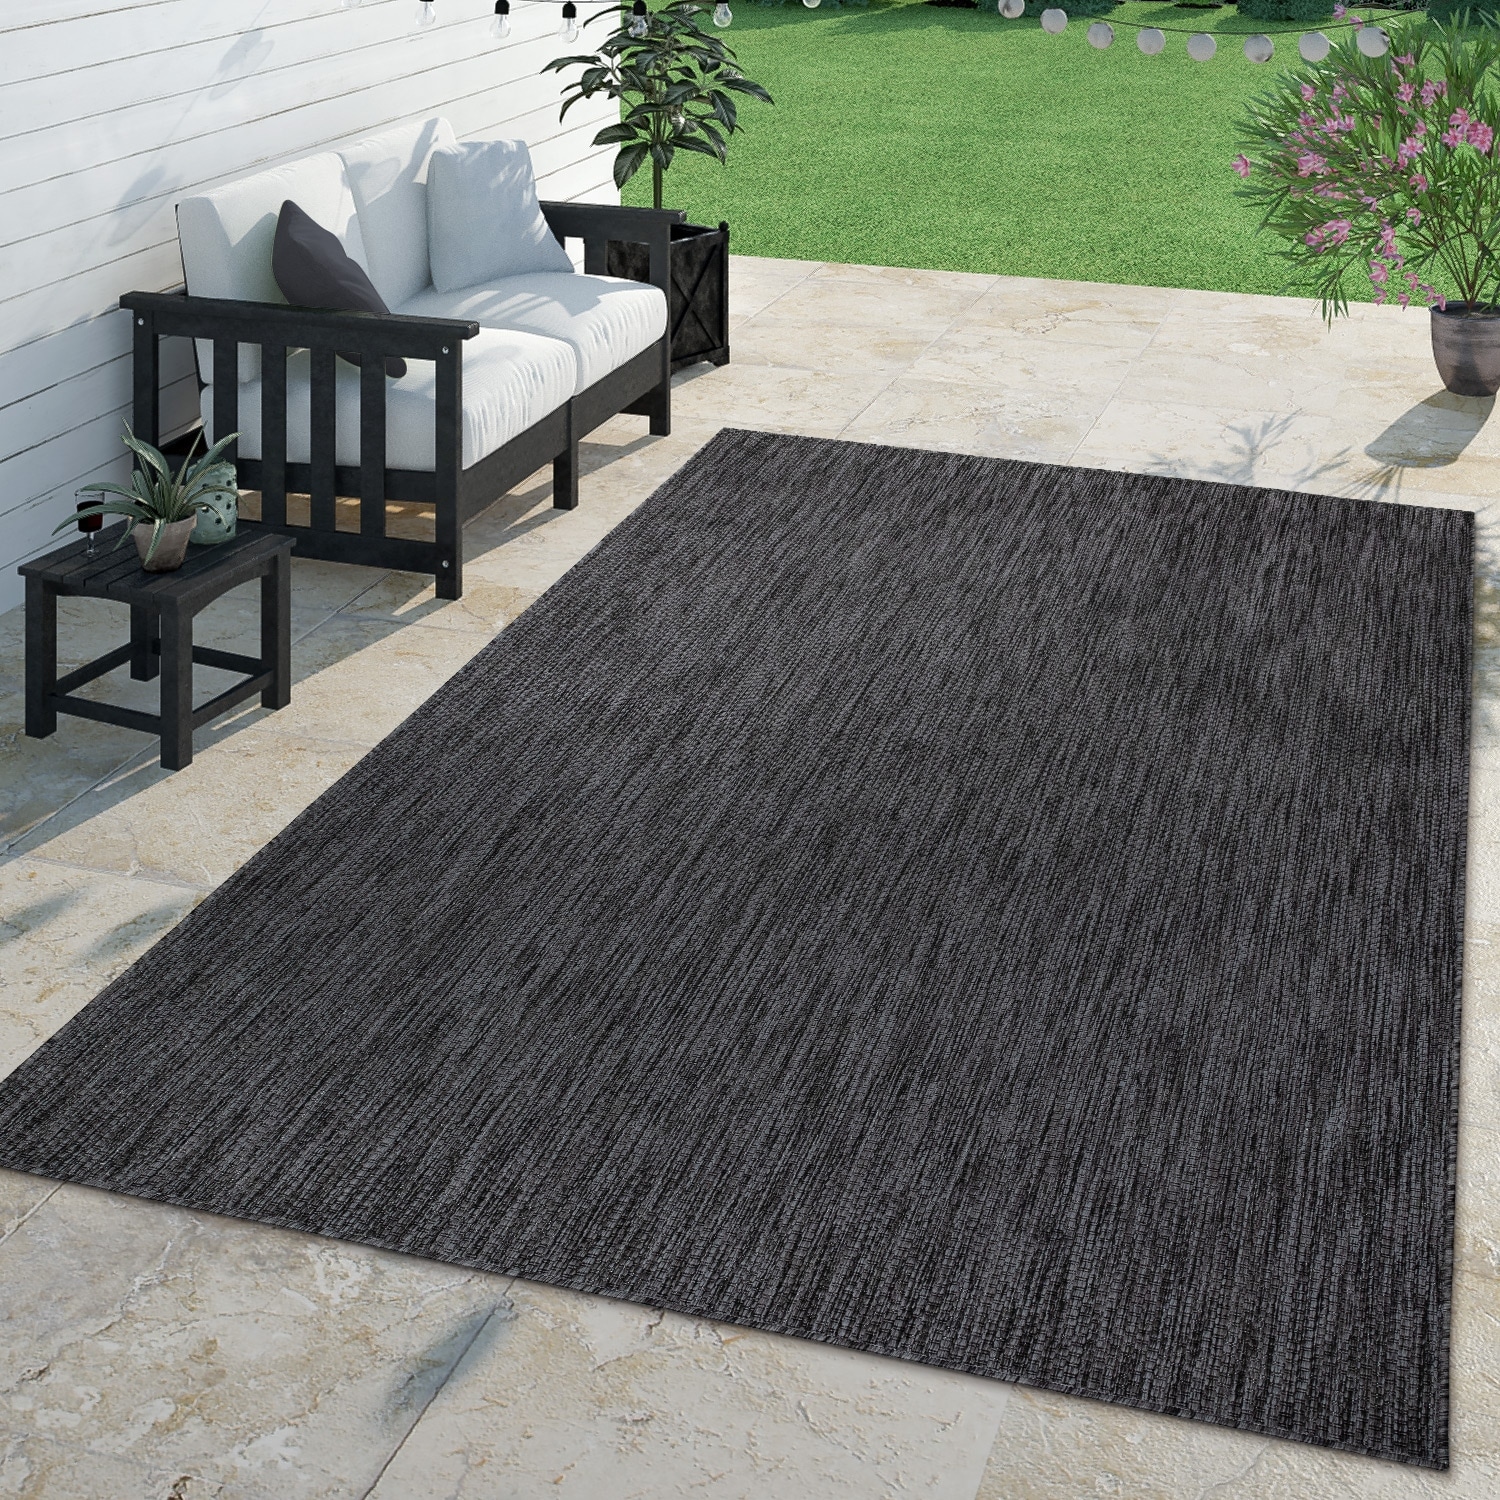 https://ak1.ostkcdn.com/images/products/is/images/direct/c7eb135ec7a241681d2c612dcb4ac87116cf0ab1/Solid-Outdoor-Rug-Waterproof-for-Patio-in-different-plain-colors.jpg